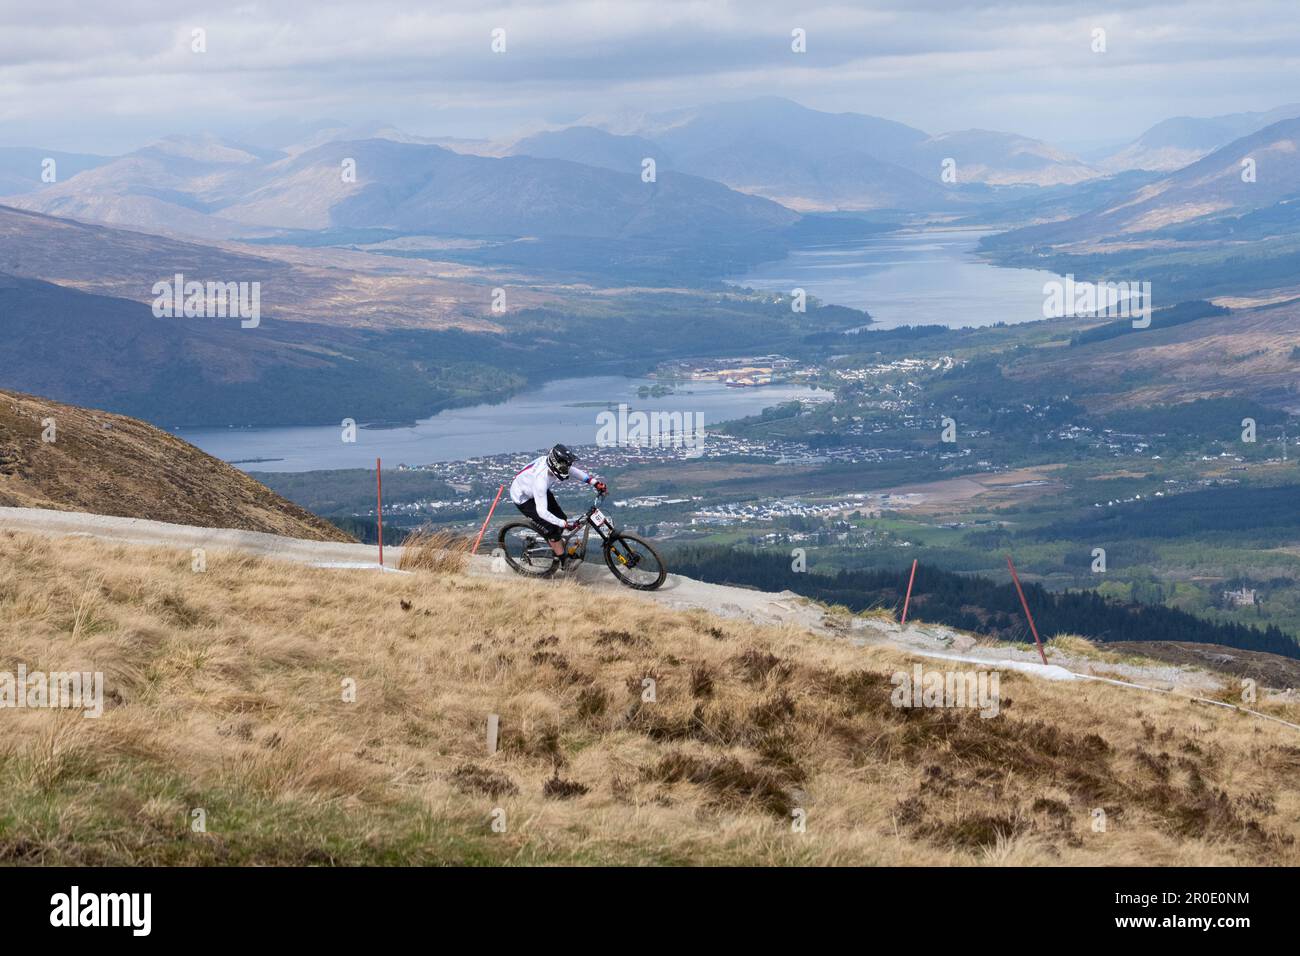 Fort William UCI World Cup track, Scotland, UK - with views of Fort William, Loch Linnhe and Loch Eil behind Stock Photo